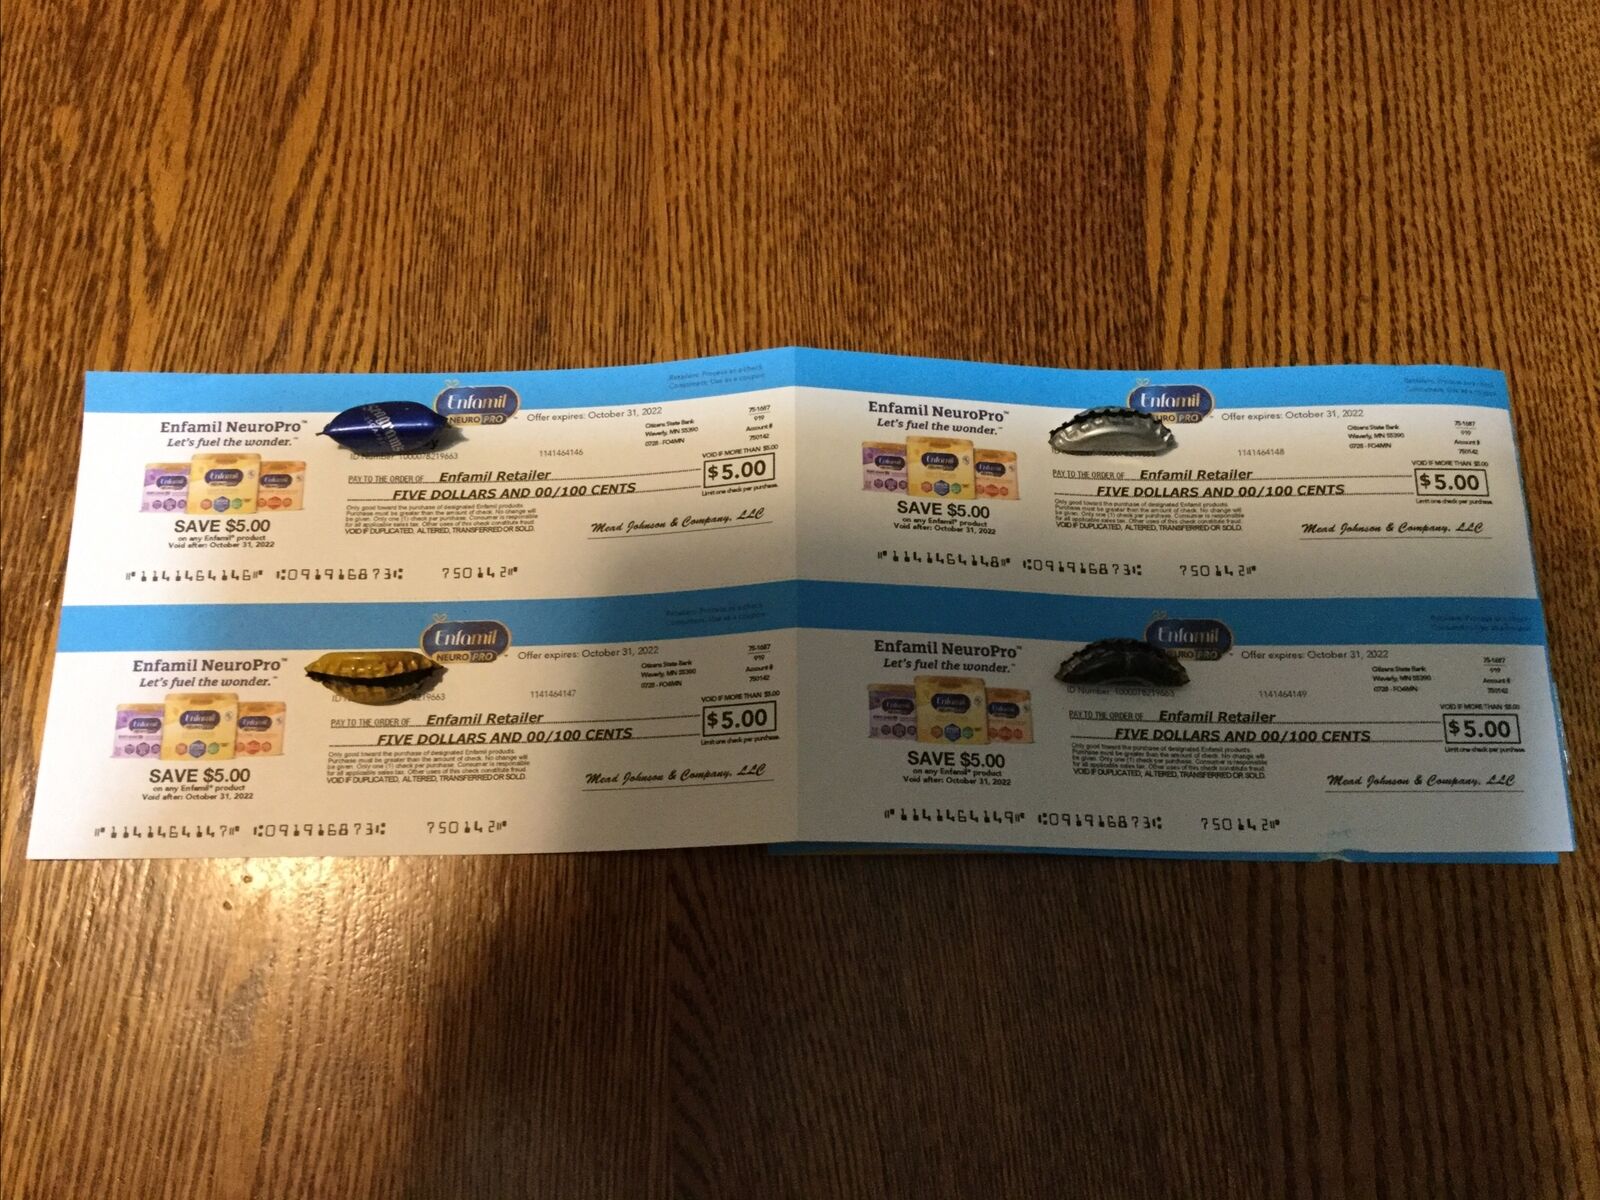 Any Enfamil 4x$5 Coupons For A Total Of $20 Exp. 10/31/2022